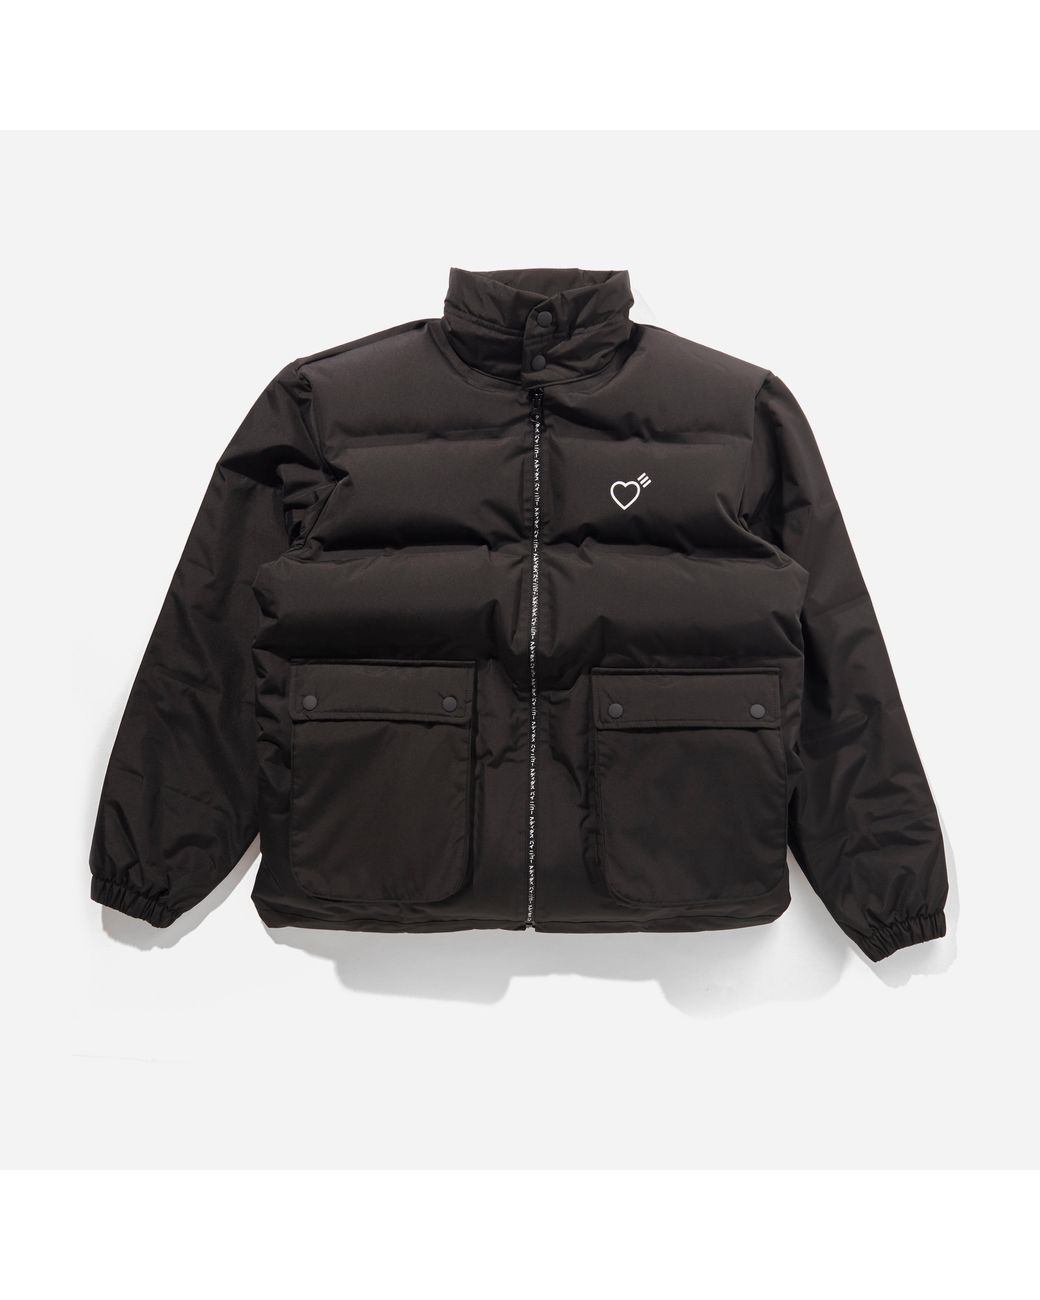 adidas Originals X Human Made Inflatable Jacket in Black for Men - Lyst